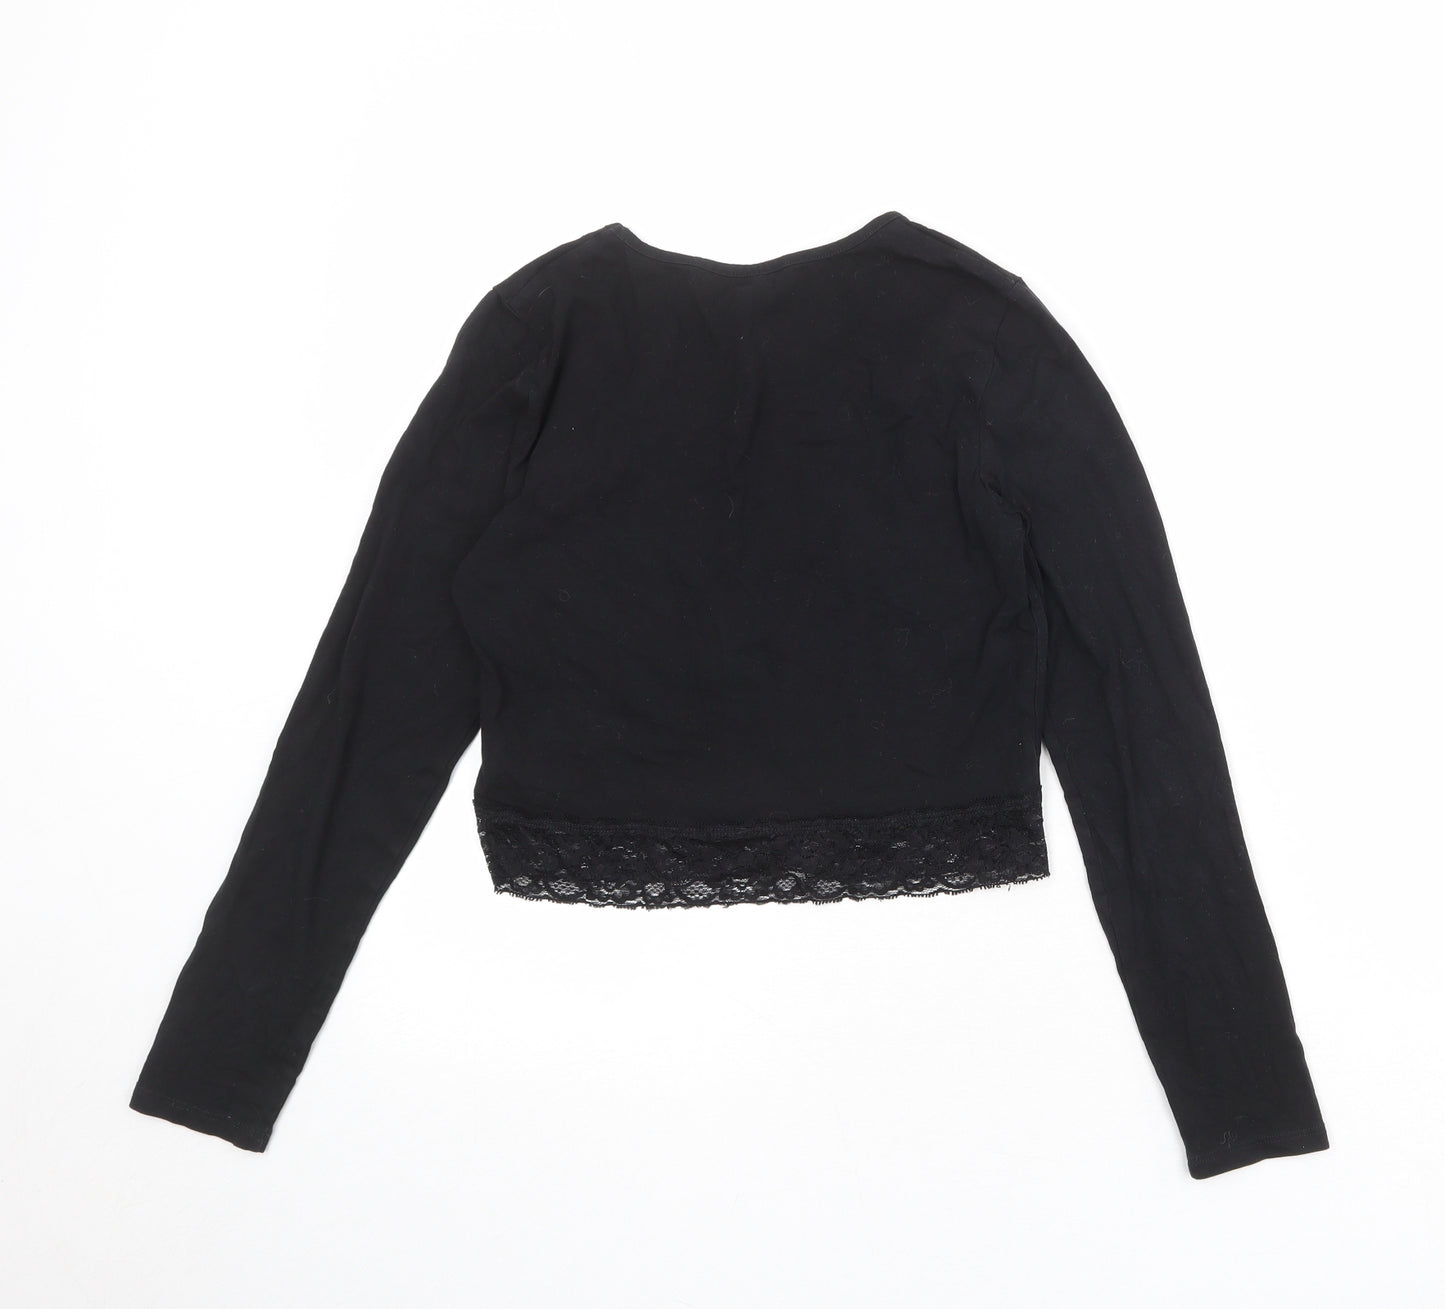 New Look Girls Black Cotton Cropped T-Shirt Size 14-15 Years Round Neck Pullover - Lace Details